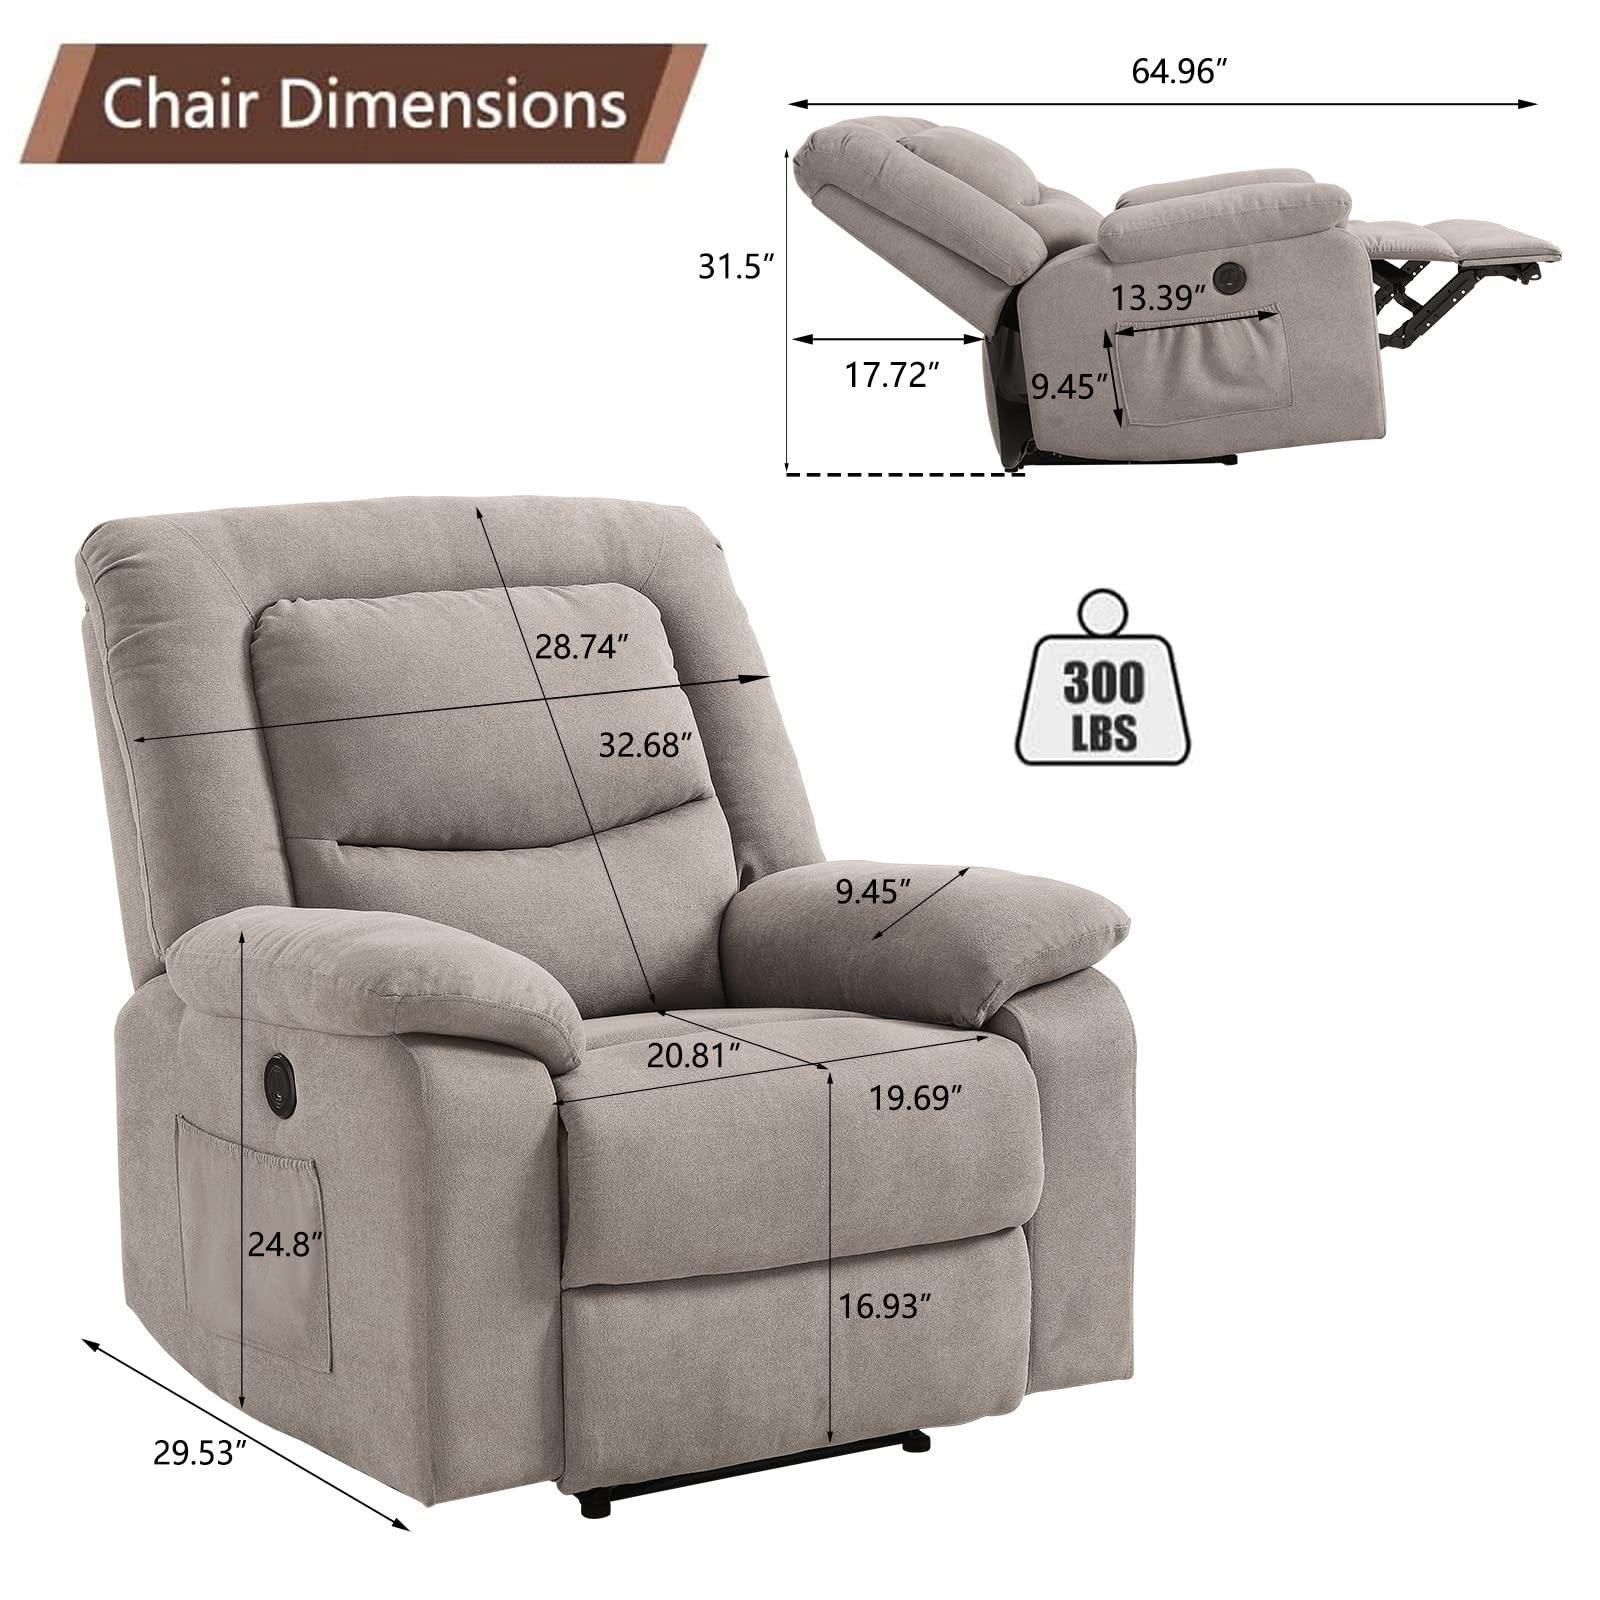 Consofa Electric Power Recliner Chair with Massage and Heat, Electric Recliner Chairs for Seniors, Electric Power Recliner Chair with USB Port, 2 Side Pockets, Microfiber Fabirc (Camel)